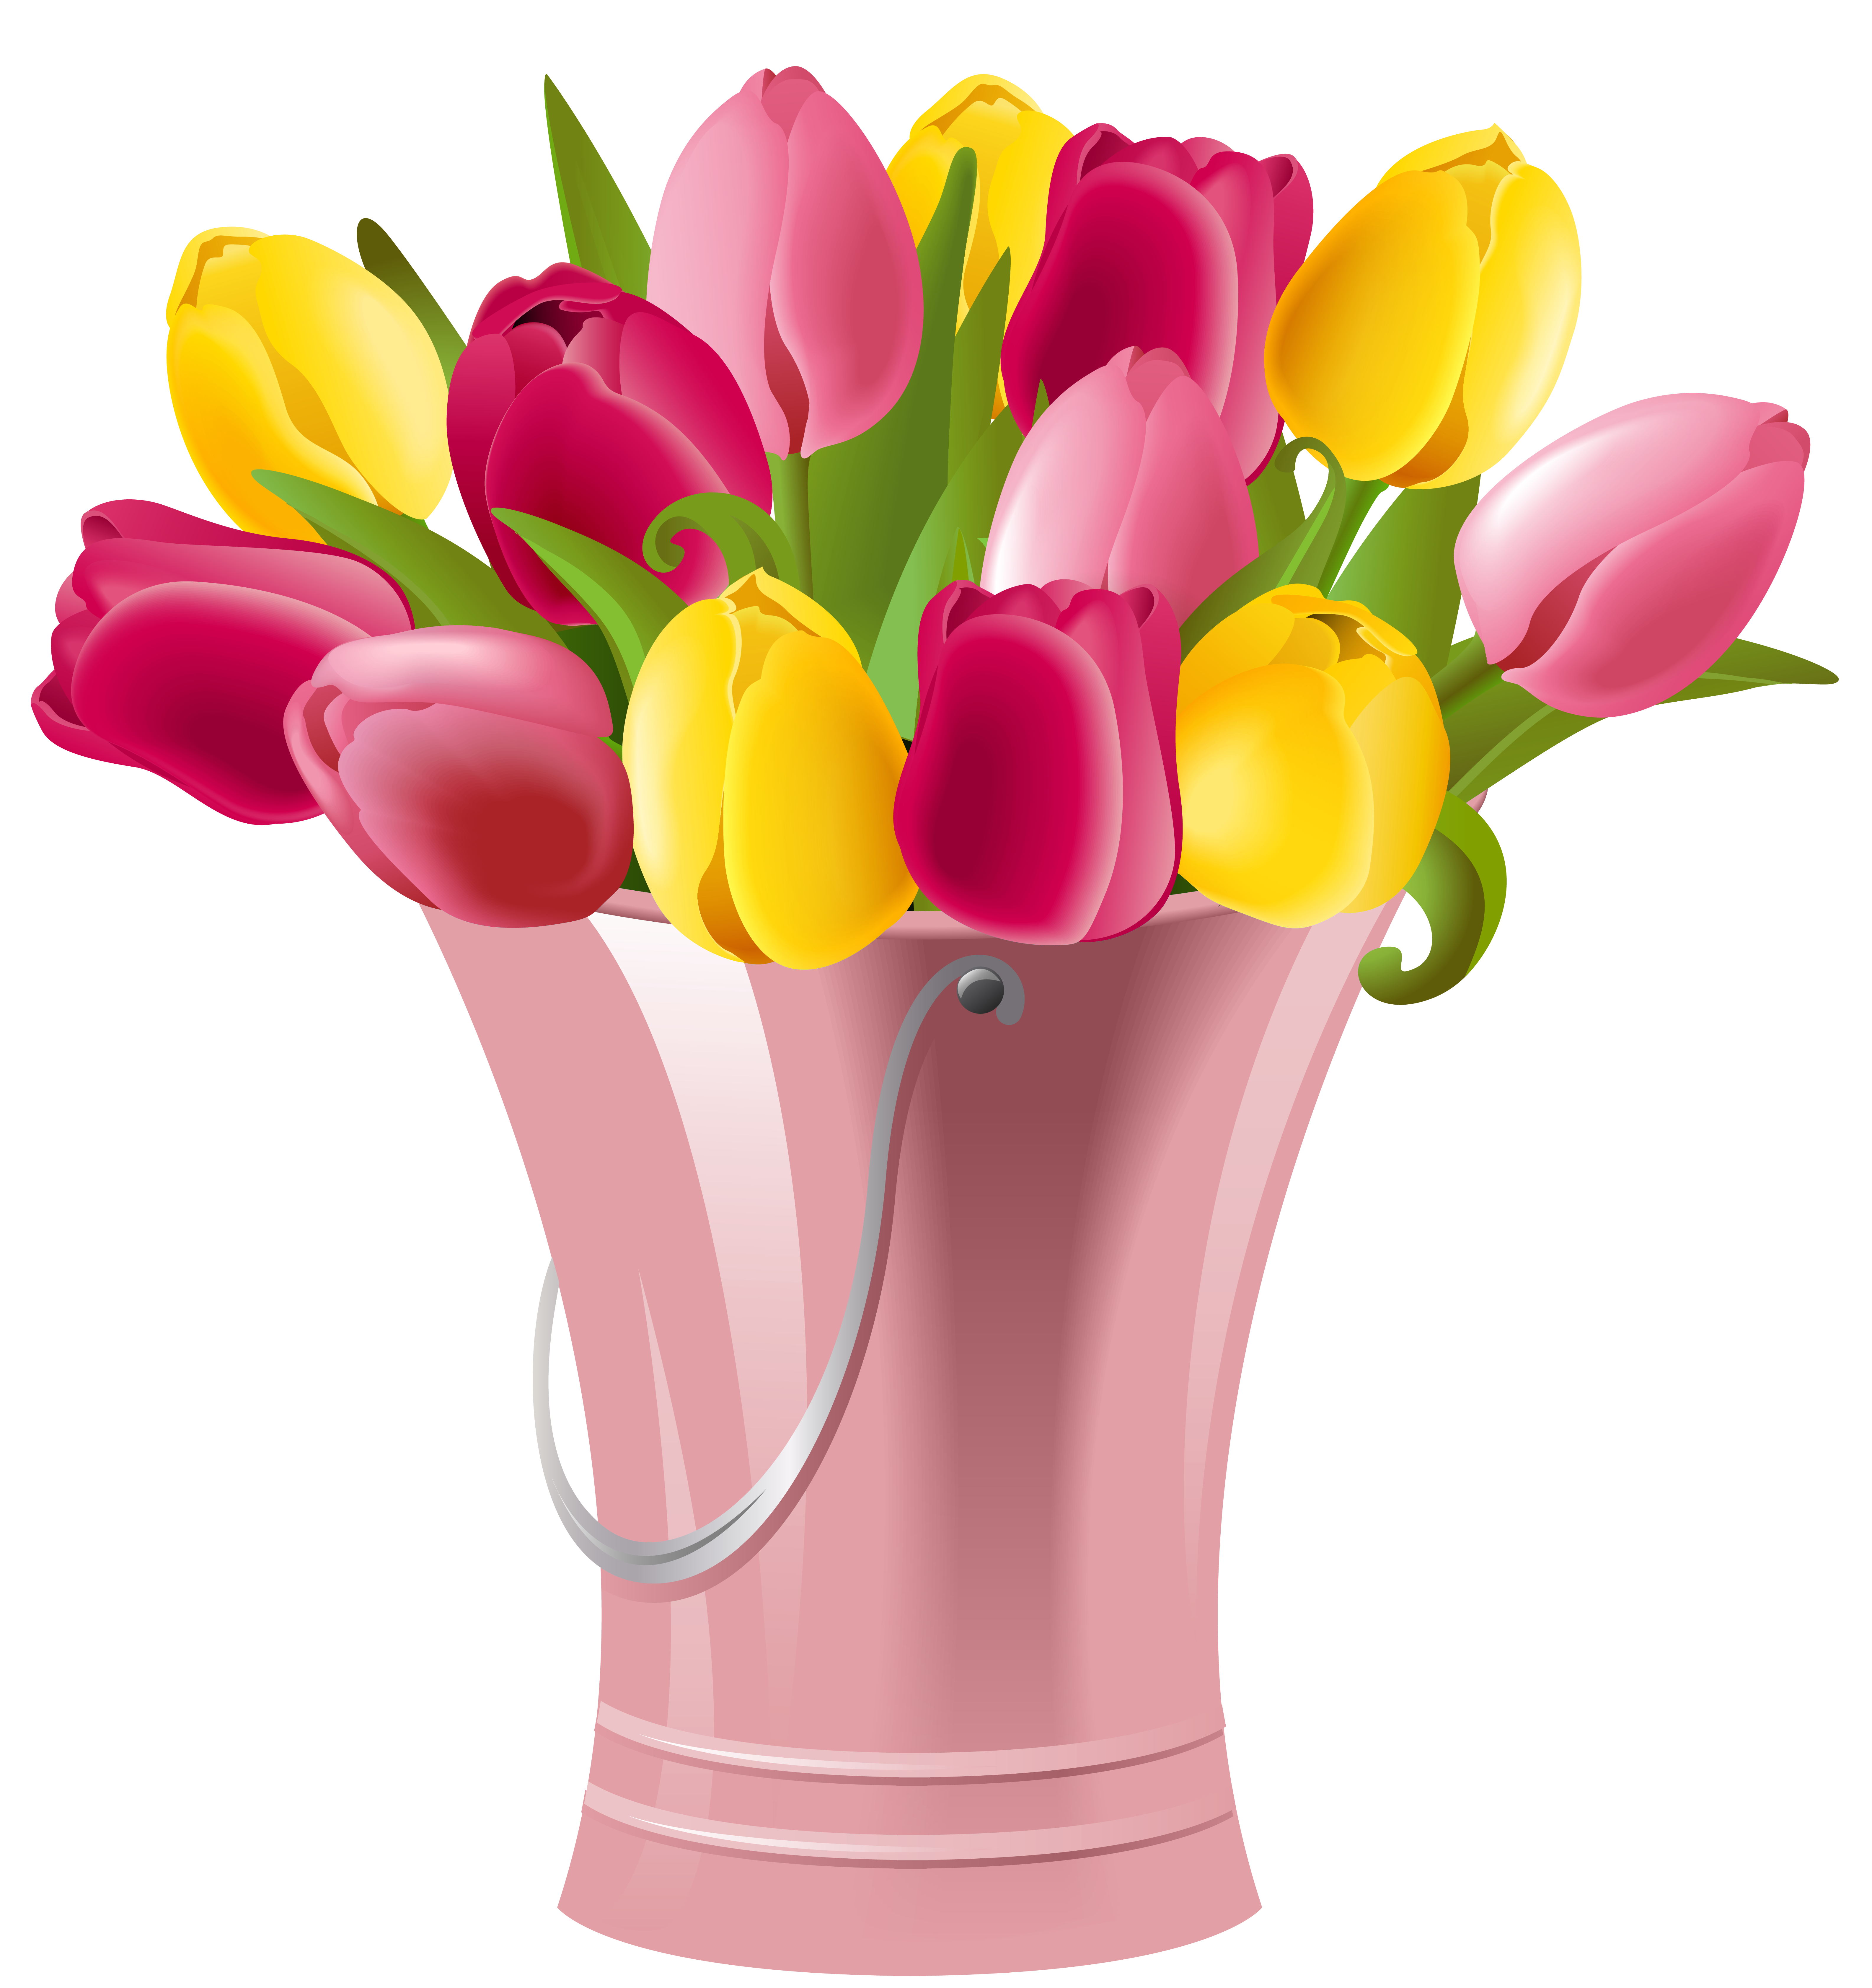 Free Spring Tulip Cliparts, Download Free Clip Art, Free ...